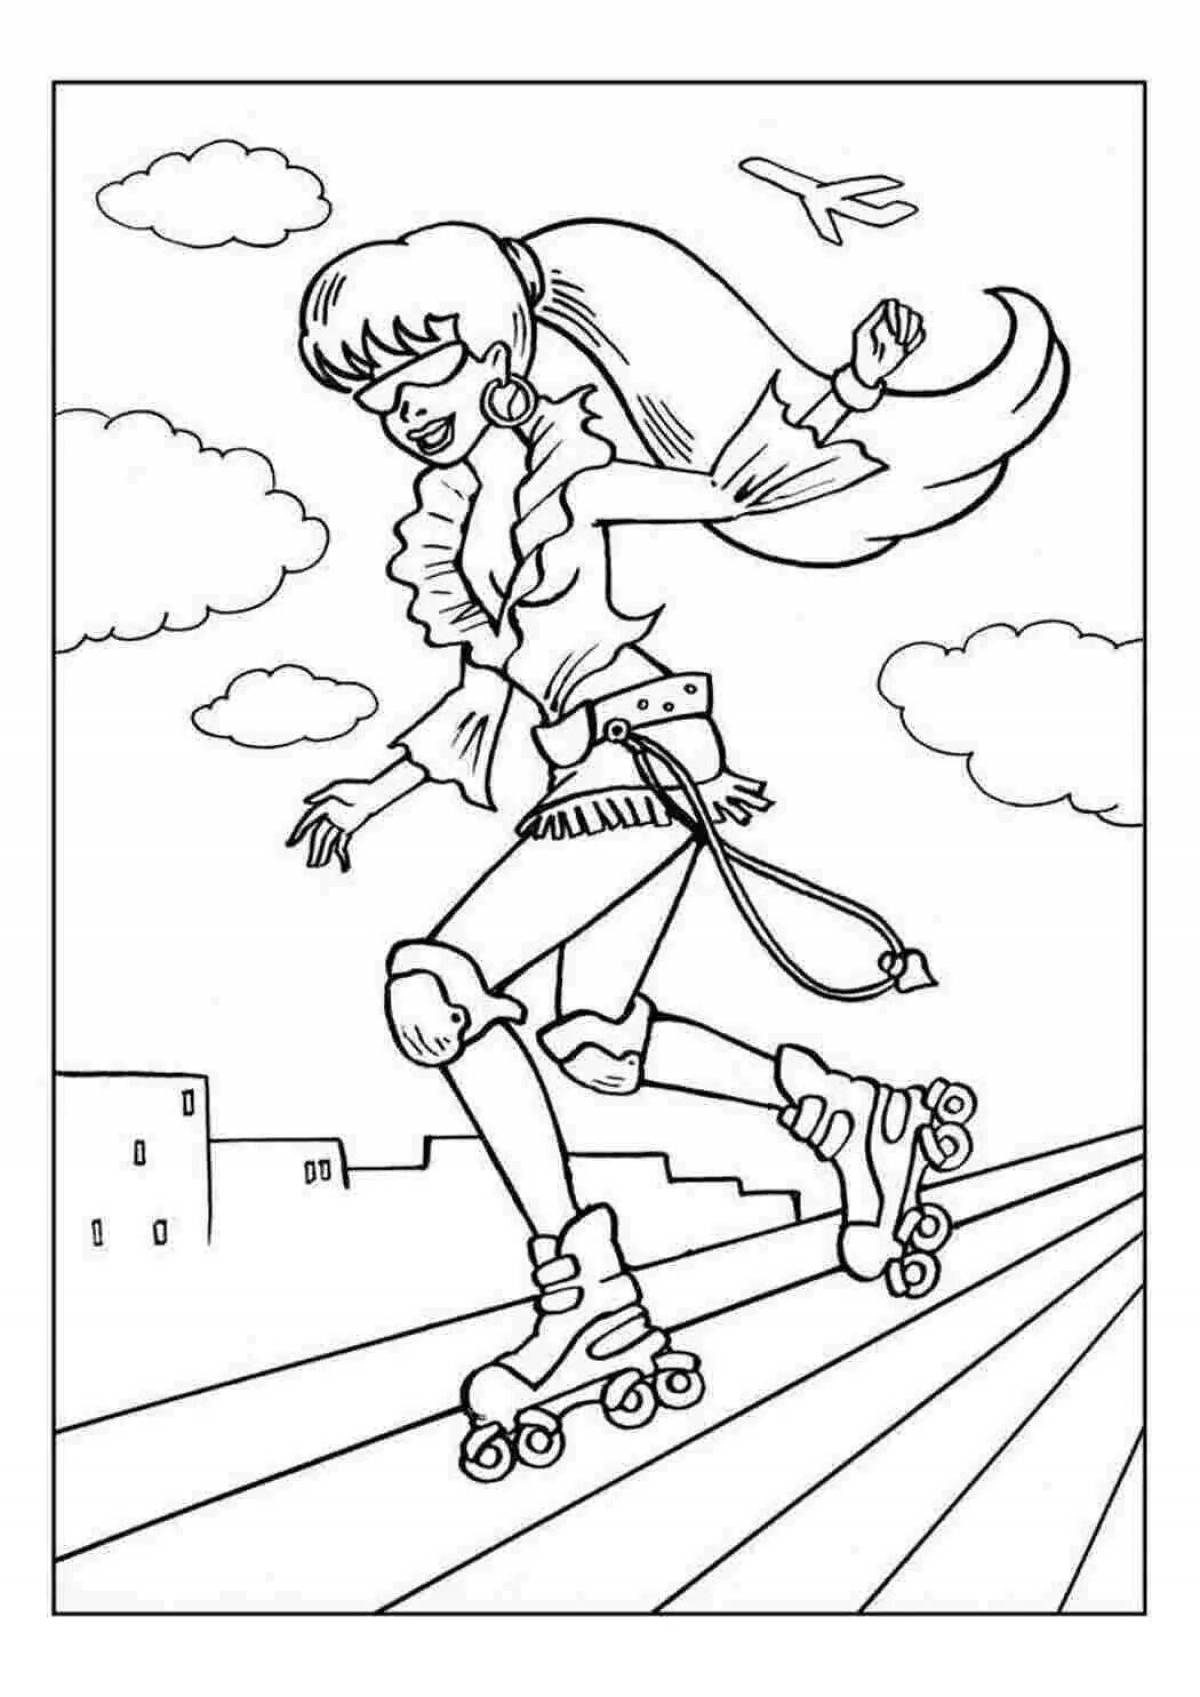 Health and wellness coloring page